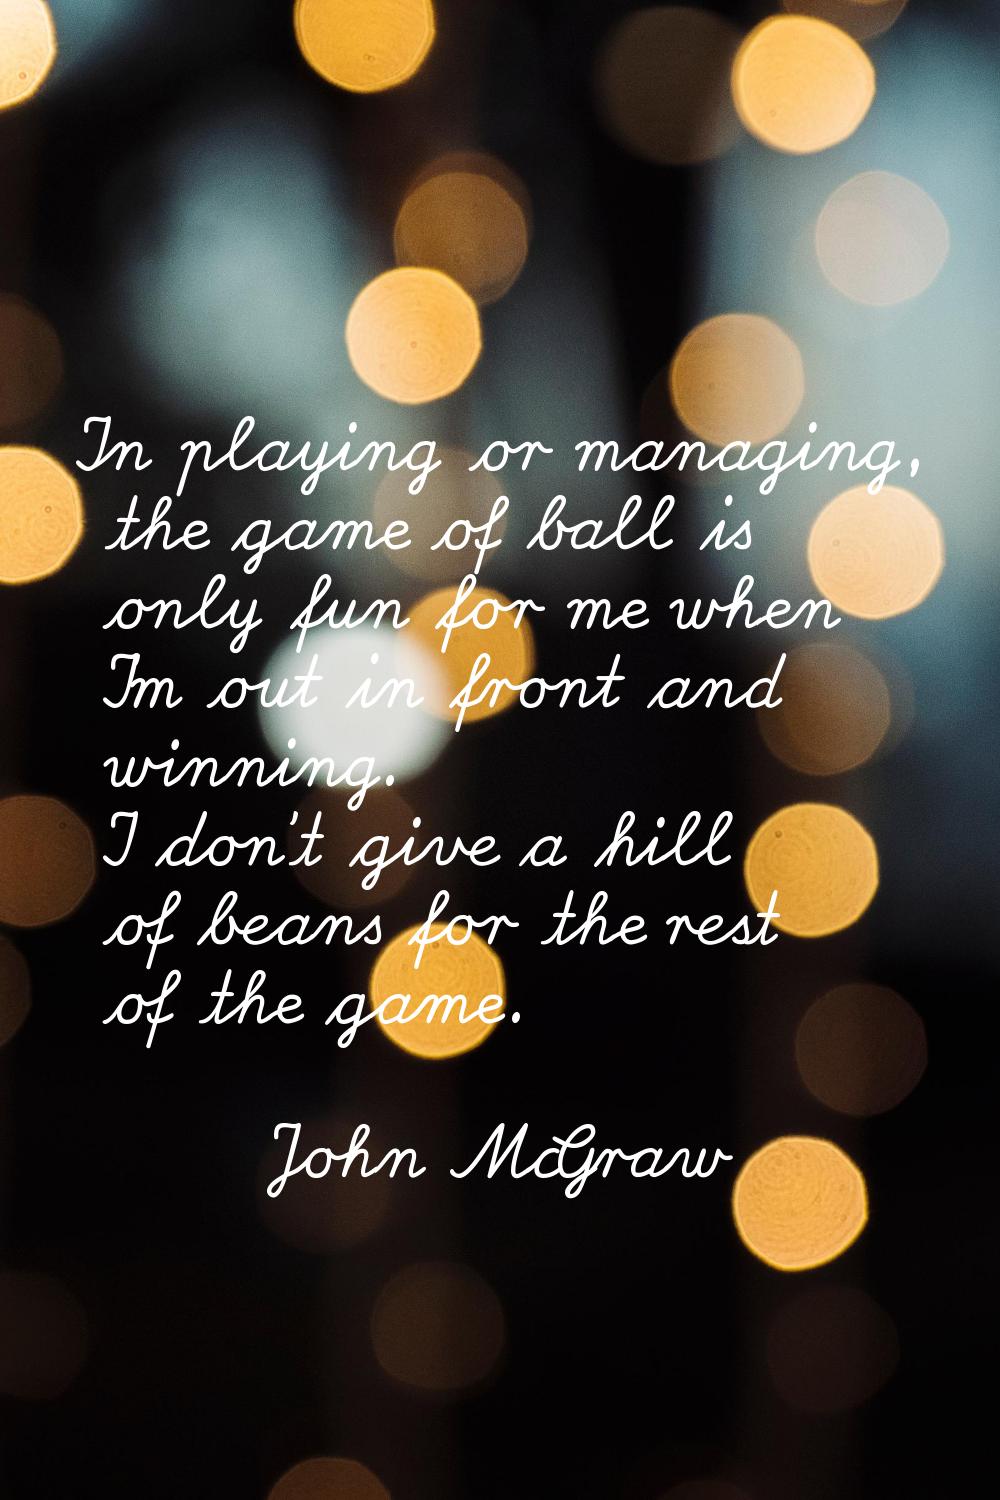 In playing or managing, the game of ball is only fun for me when I'm out in front and winning. I do